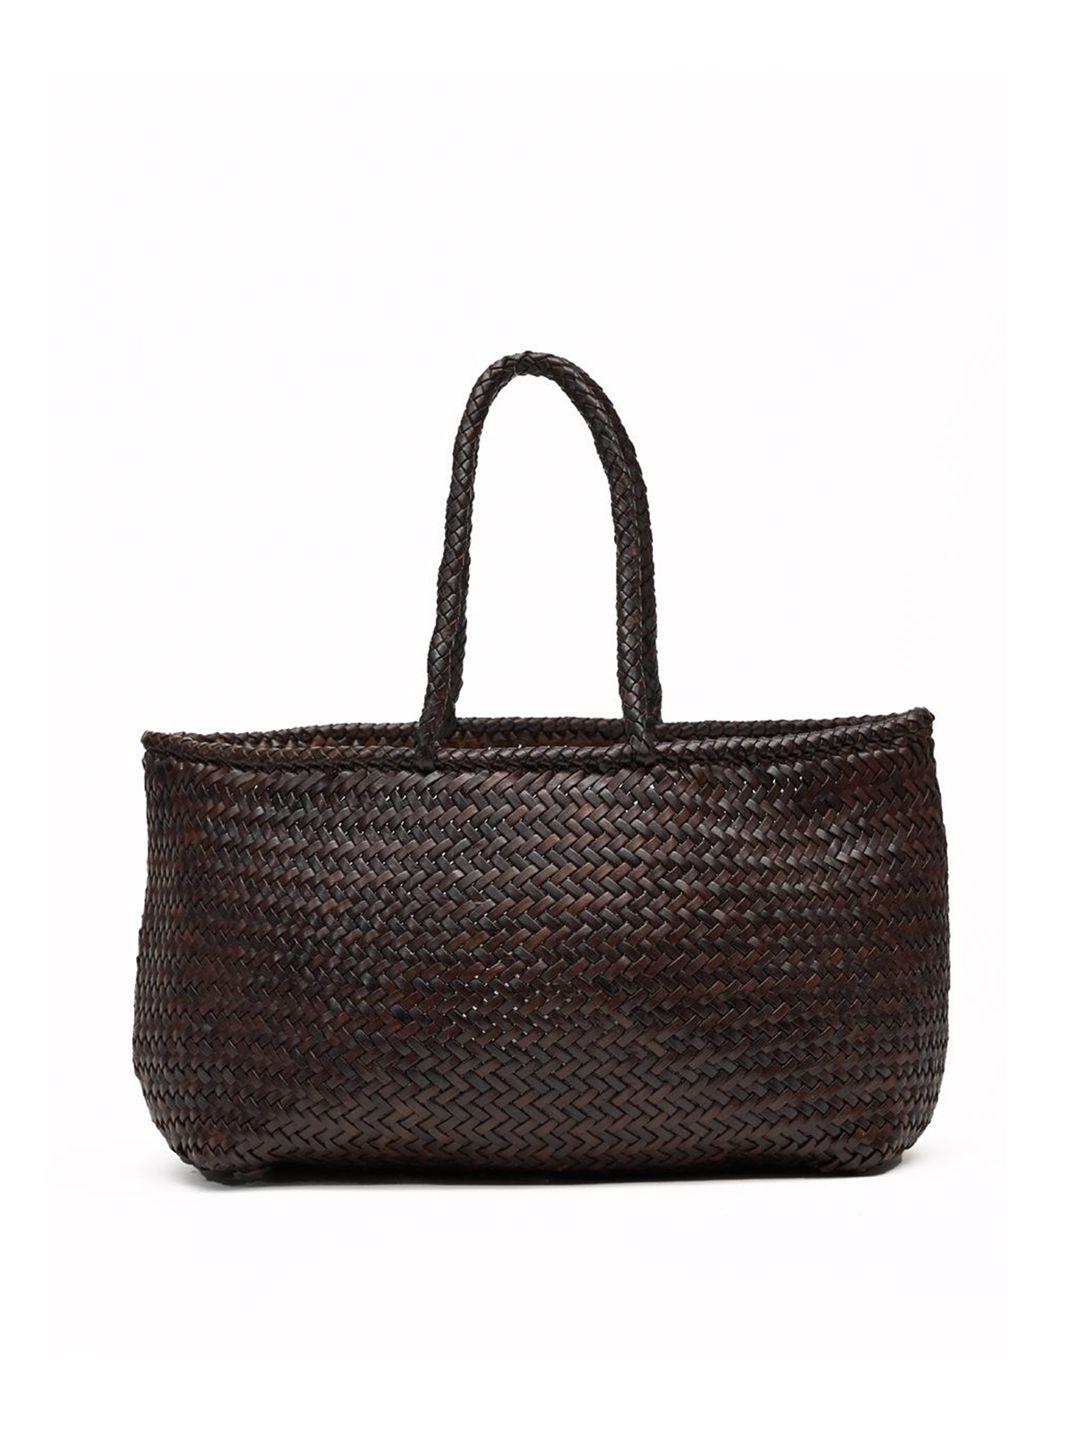 mistry textured structured leather handheld bag